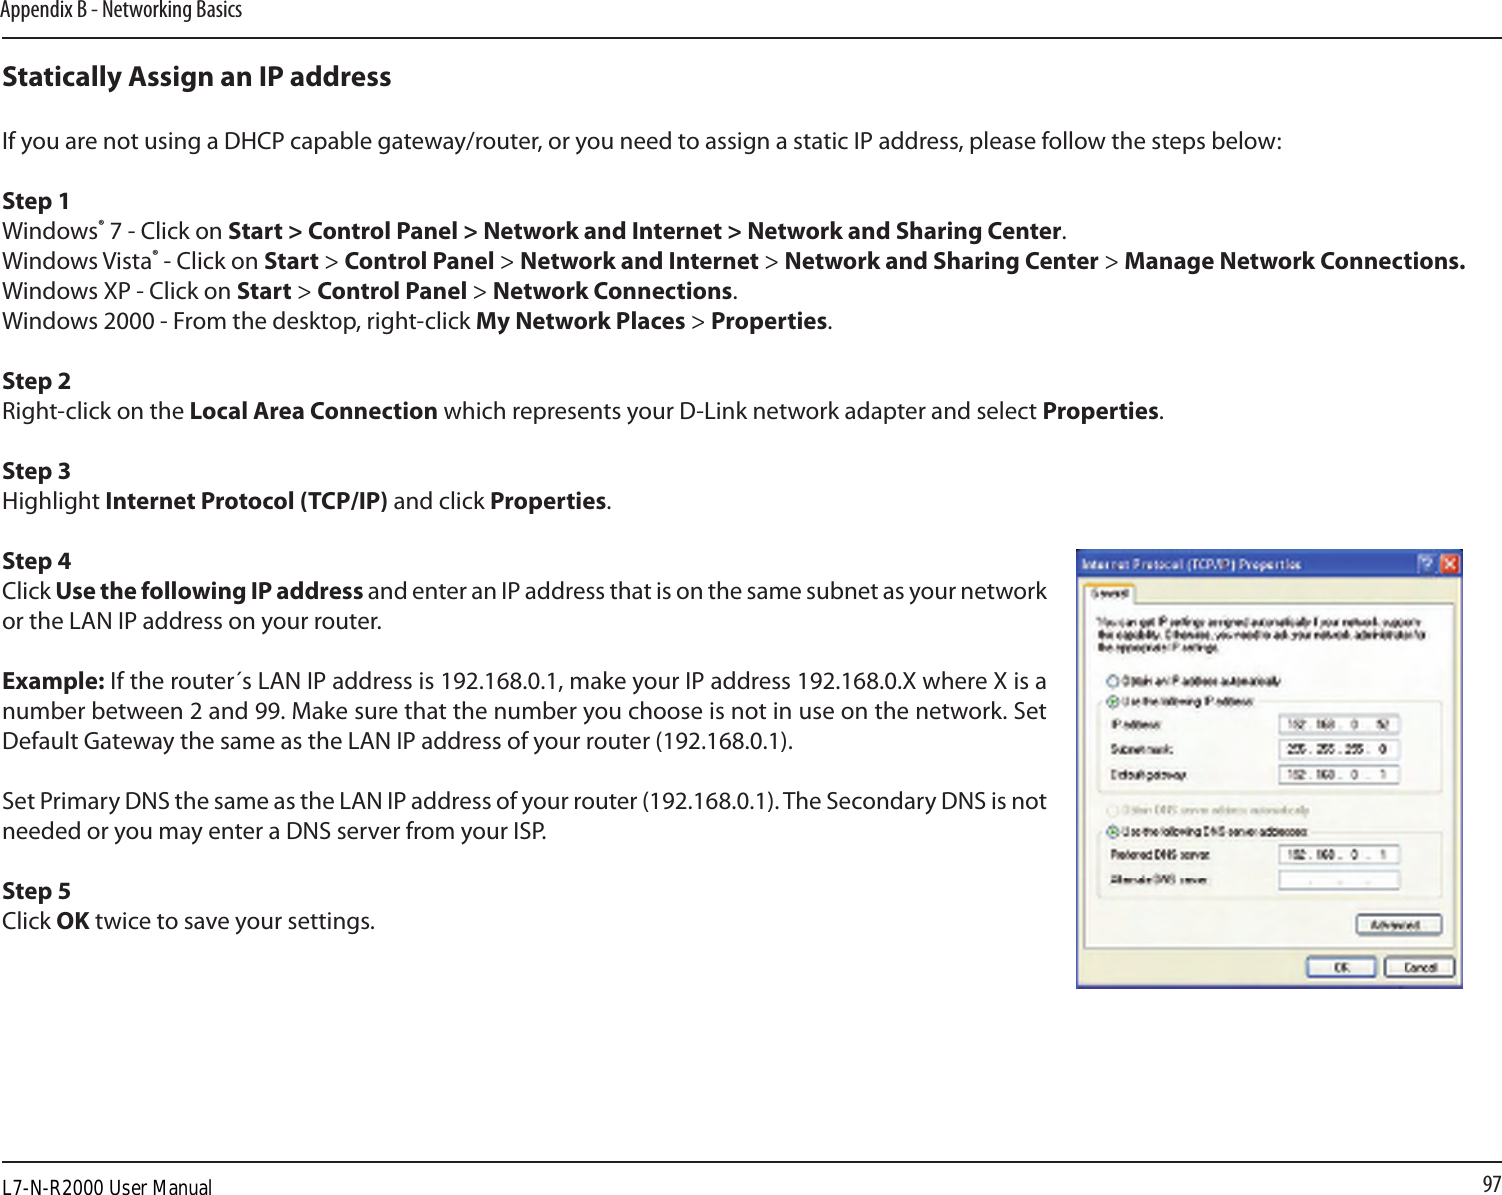 97Appendix B - Networking BasicsStatically Assign an IP addressIf you are not using a DHCP capable gateway/router, or you need to assign a static IP address, please follow the steps below:Step 1Windows® 7 - Click on Start &gt; Control Panel &gt; Network and Internet &gt; Network and Sharing Center.Windows Vista® - Click on Start &gt; Control Panel &gt; Network and Internet &gt; Network and Sharing Center &gt; Manage Network Connections.Windows XP - Click on Start &gt; Control Panel &gt; Network Connections.Windows 2000 - From the desktop, right-click My Network Places &gt; Properties.Step 2Right-click on the Local Area Connection which represents your D-Link network adapter and select Properties.Step 3Highlight Internet Protocol (TCP/IP) and click Properties.Step 4Click Use the following IP address and enter an IP address that is on the same subnet as your network or the LAN IP address on your router. Example: If the router´s LAN IP address is 192.168.0.1, make your IP address 192.168.0.X where X is a number between 2 and 99. Make sure that the number you choose is not in use on the network. Set Default Gateway the same as the LAN IP address of your router (192.168.0.1). Set Primary DNS the same as the LAN IP address of your router (192.168.0.1). The Secondary DNS is not needed or you may enter a DNS server from your ISP.Step 5Click OK twice to save your settings.L7-N-R2000 User Manual